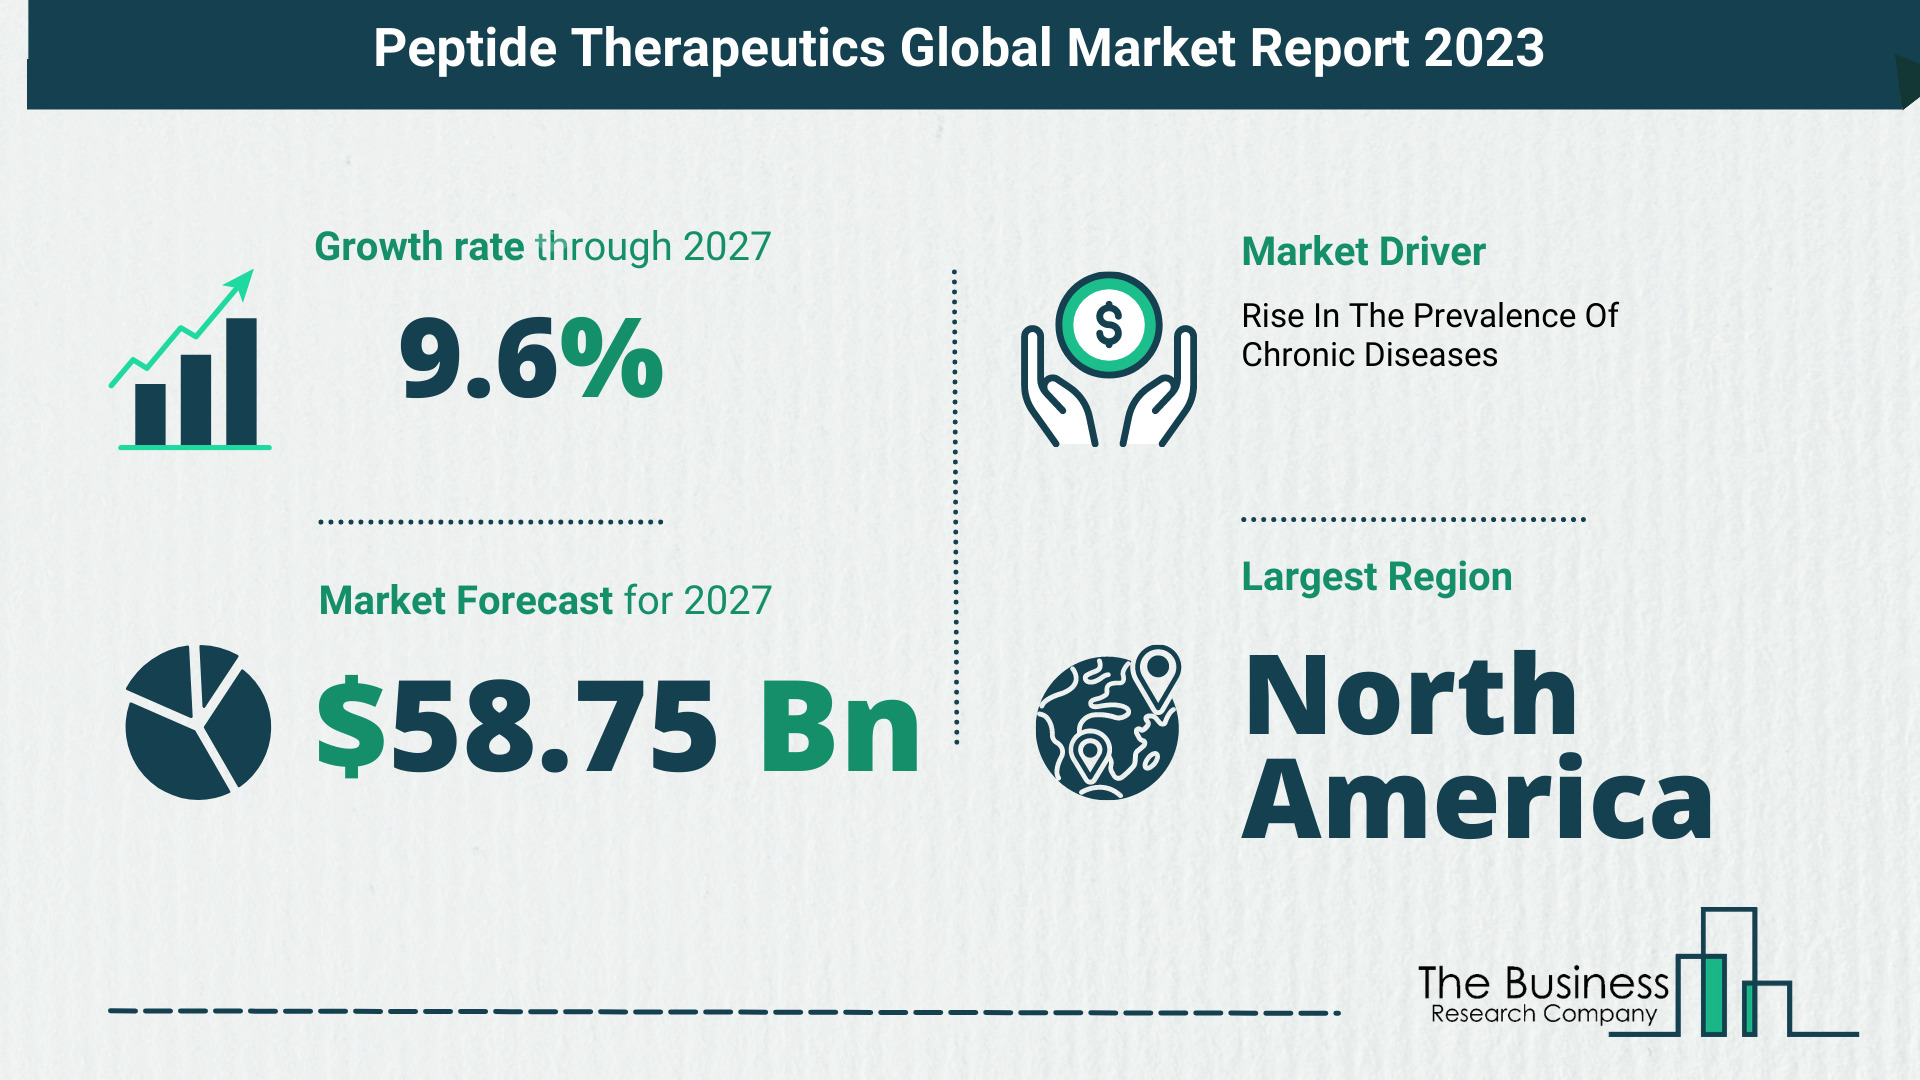 Key Trends And Drivers In The Peptide Therapeutics Market 2023